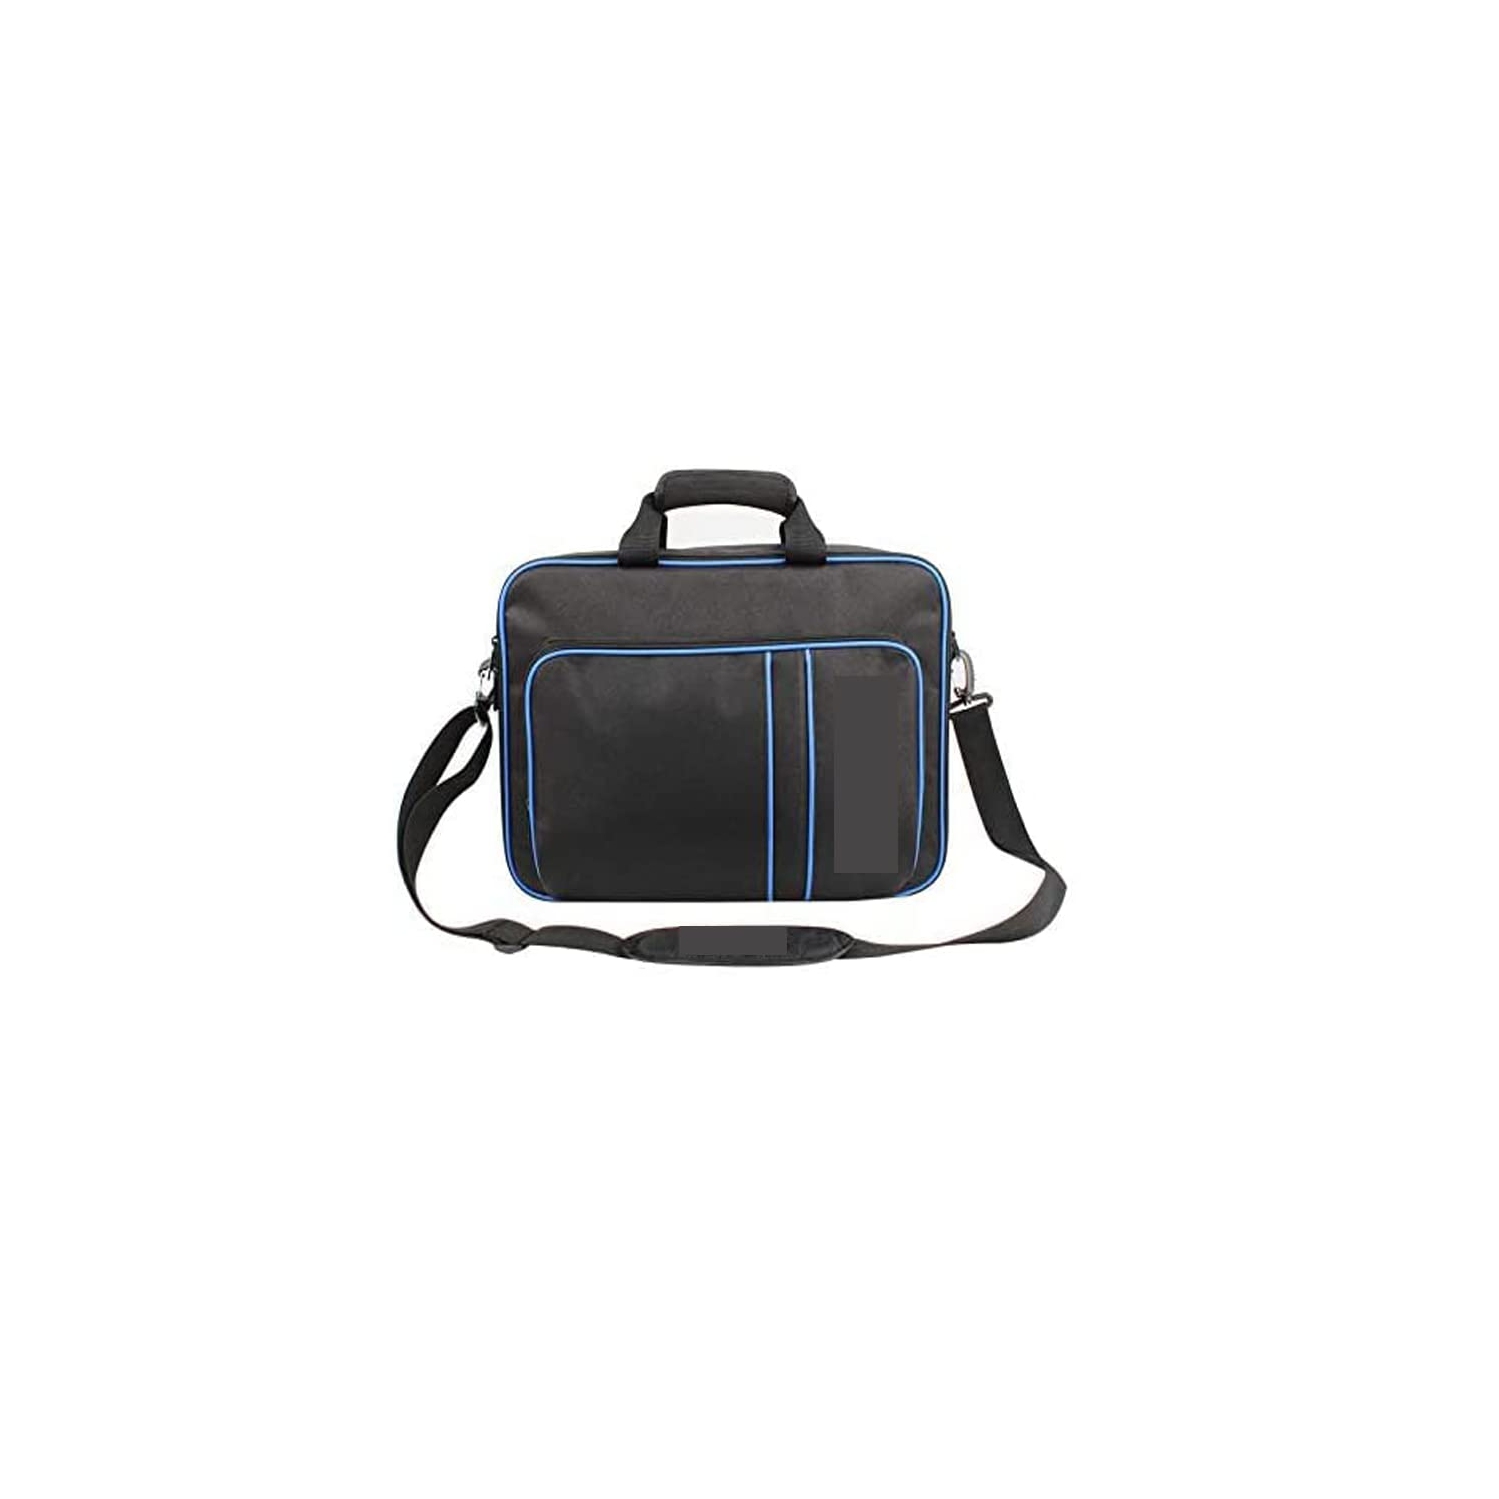 Lelukee PS5 Carrying Case Bag, Shockproof Game System Protective